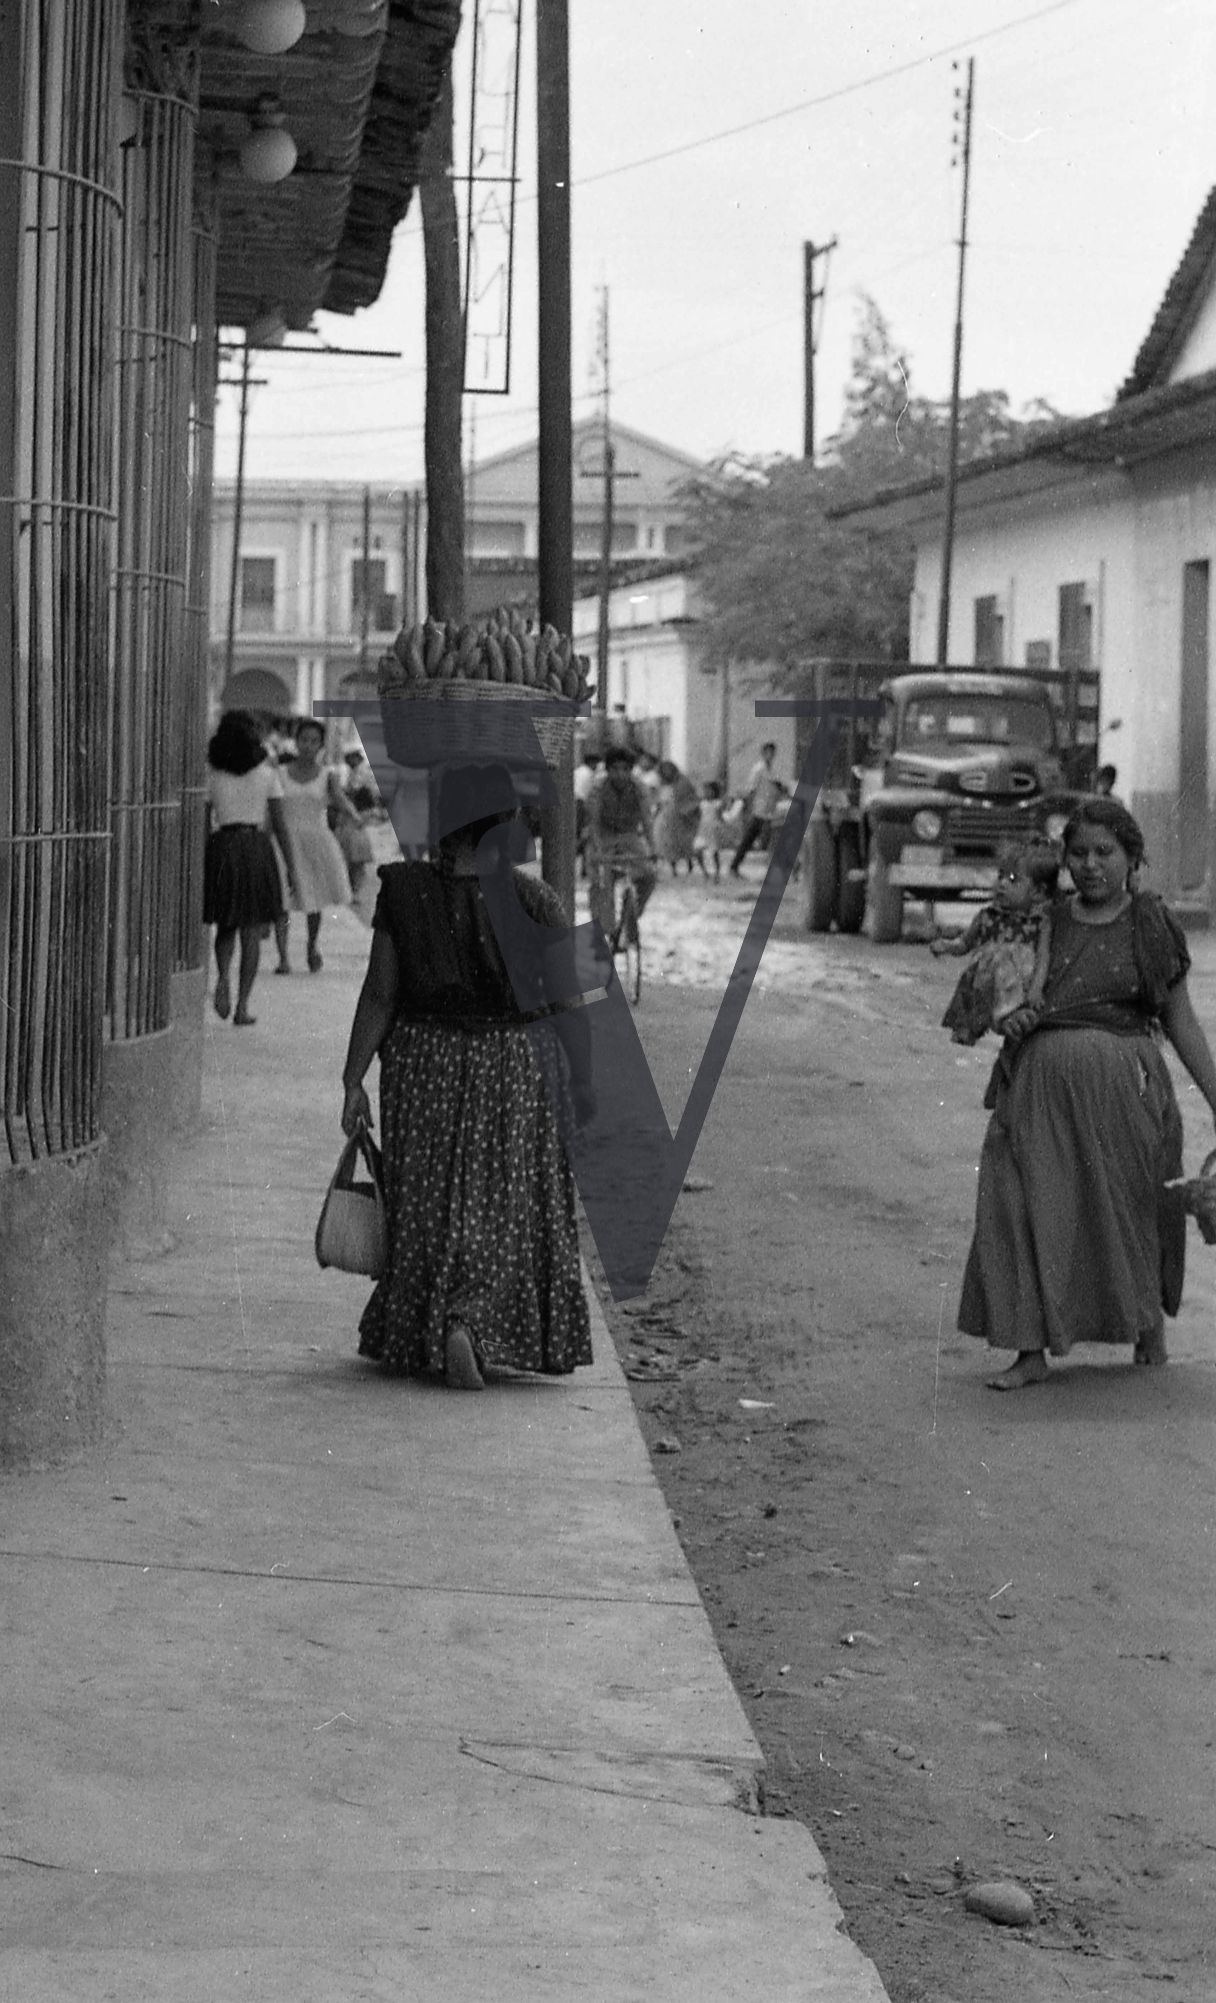 Mexico, Street view, woman carrying bananas on head.